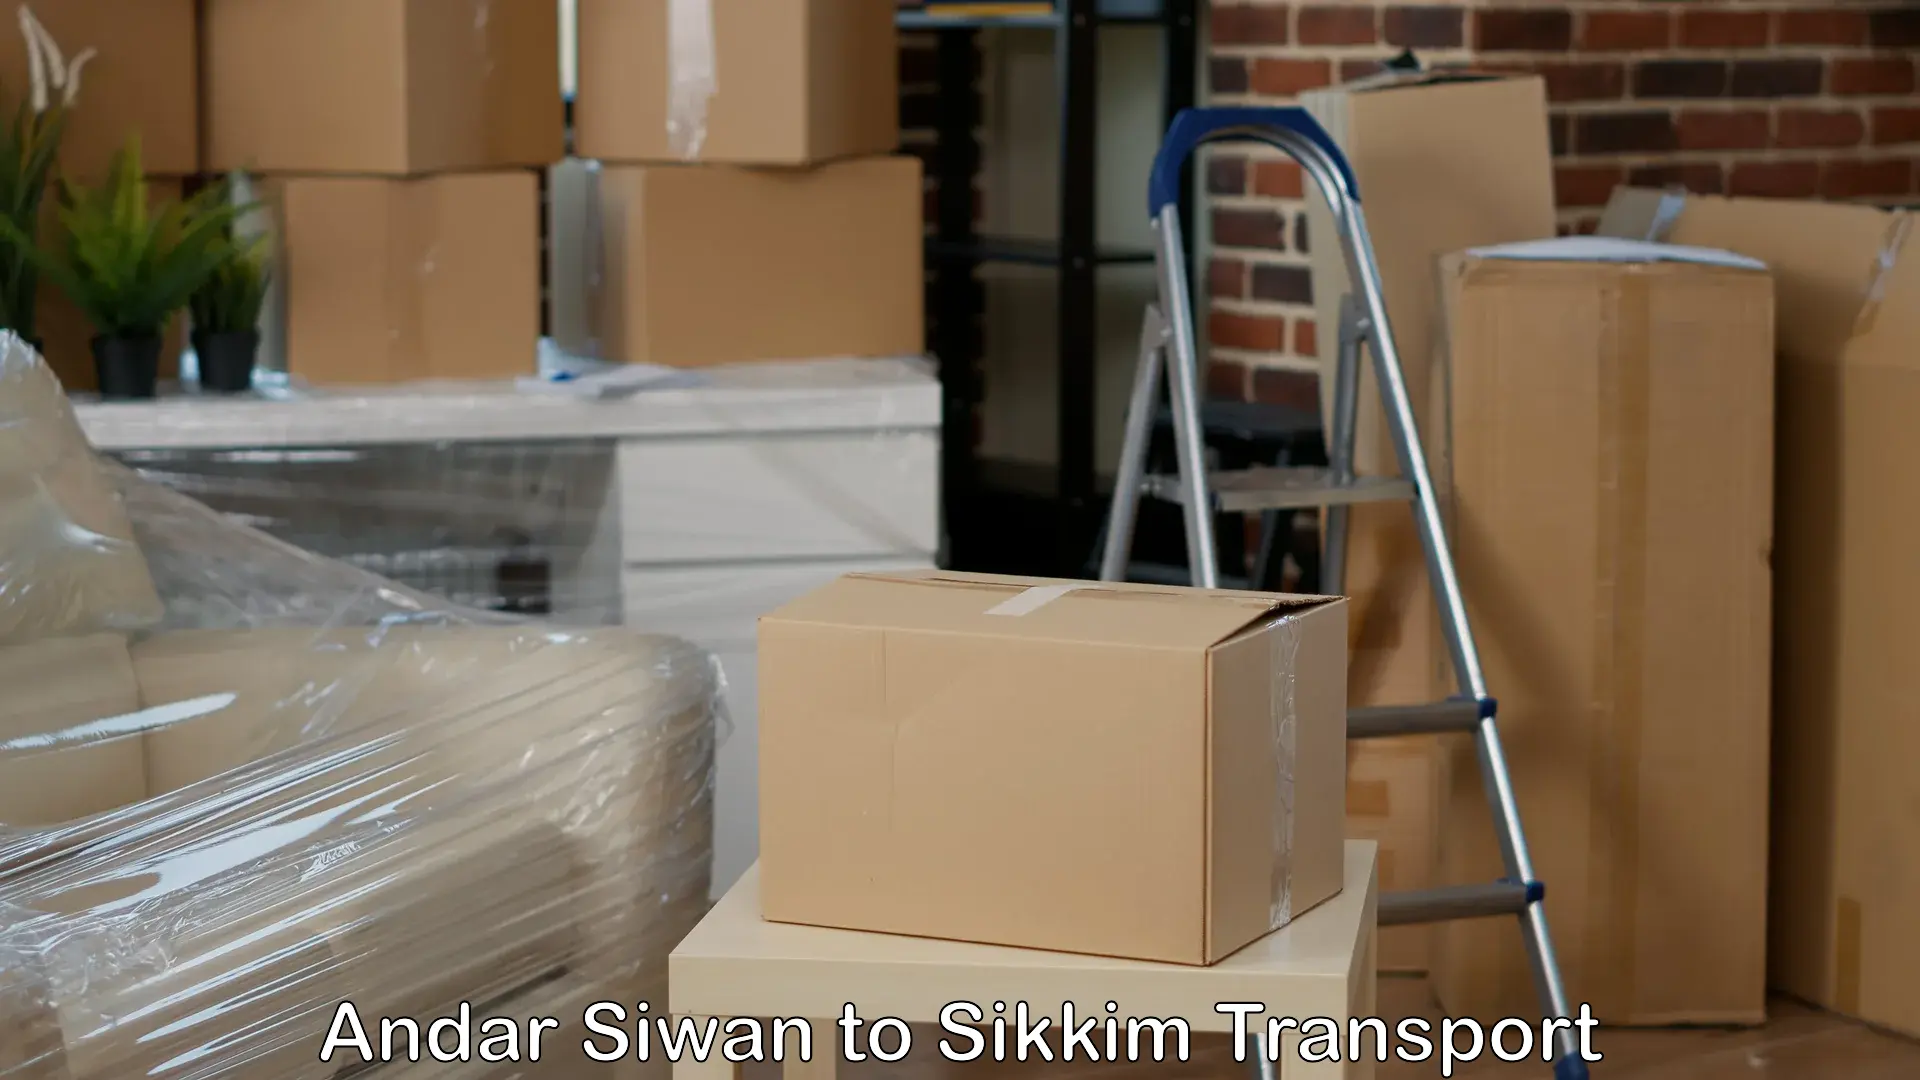 Express transport services Andar Siwan to Sikkim